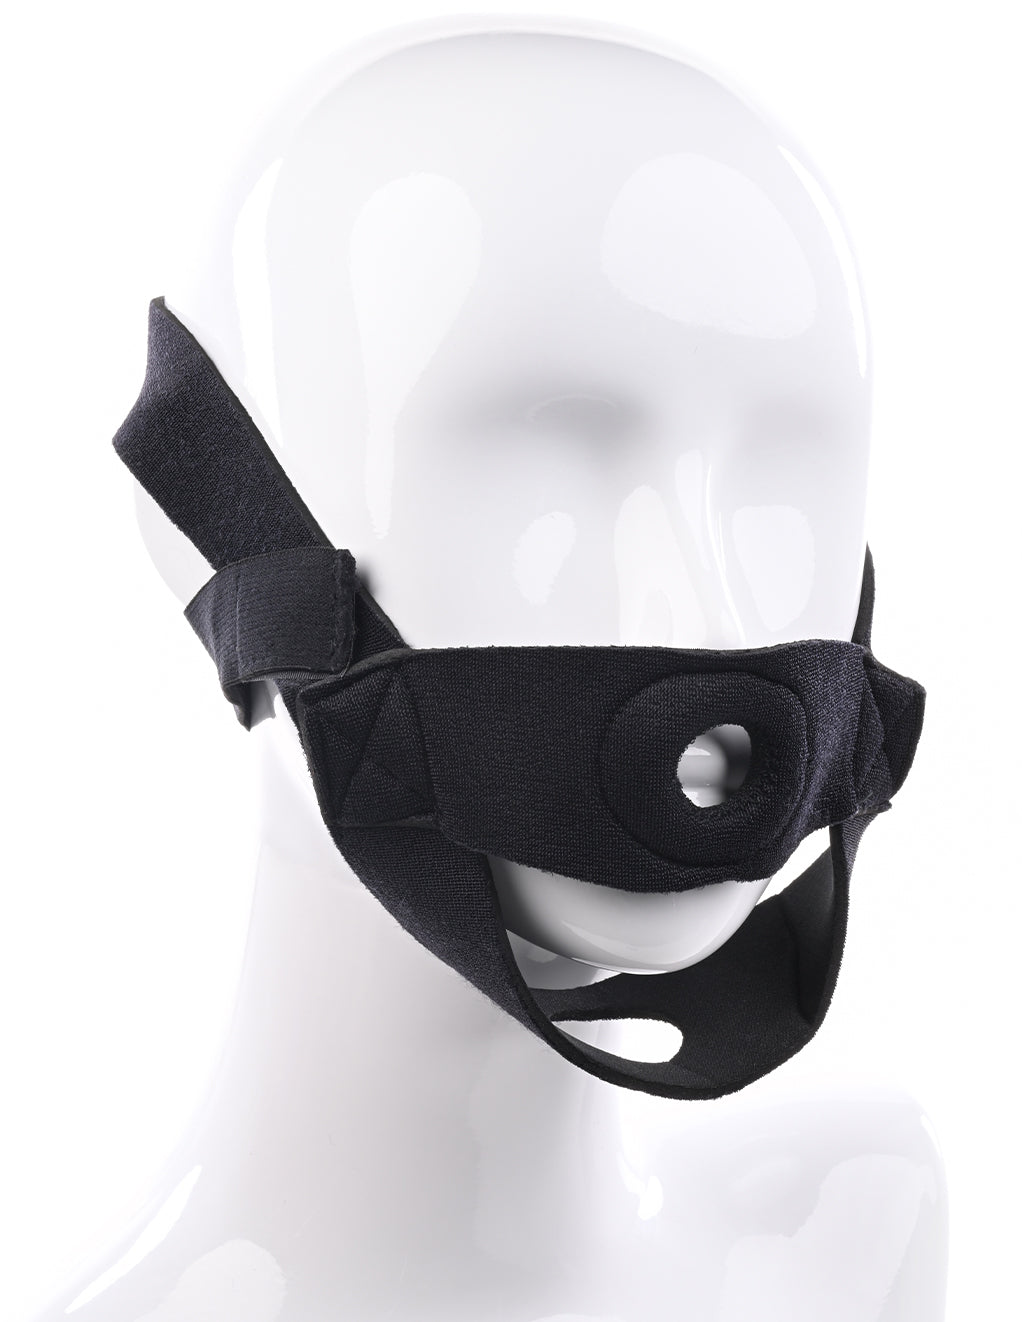 Sportsheets Face Strap On- Front Angle on model